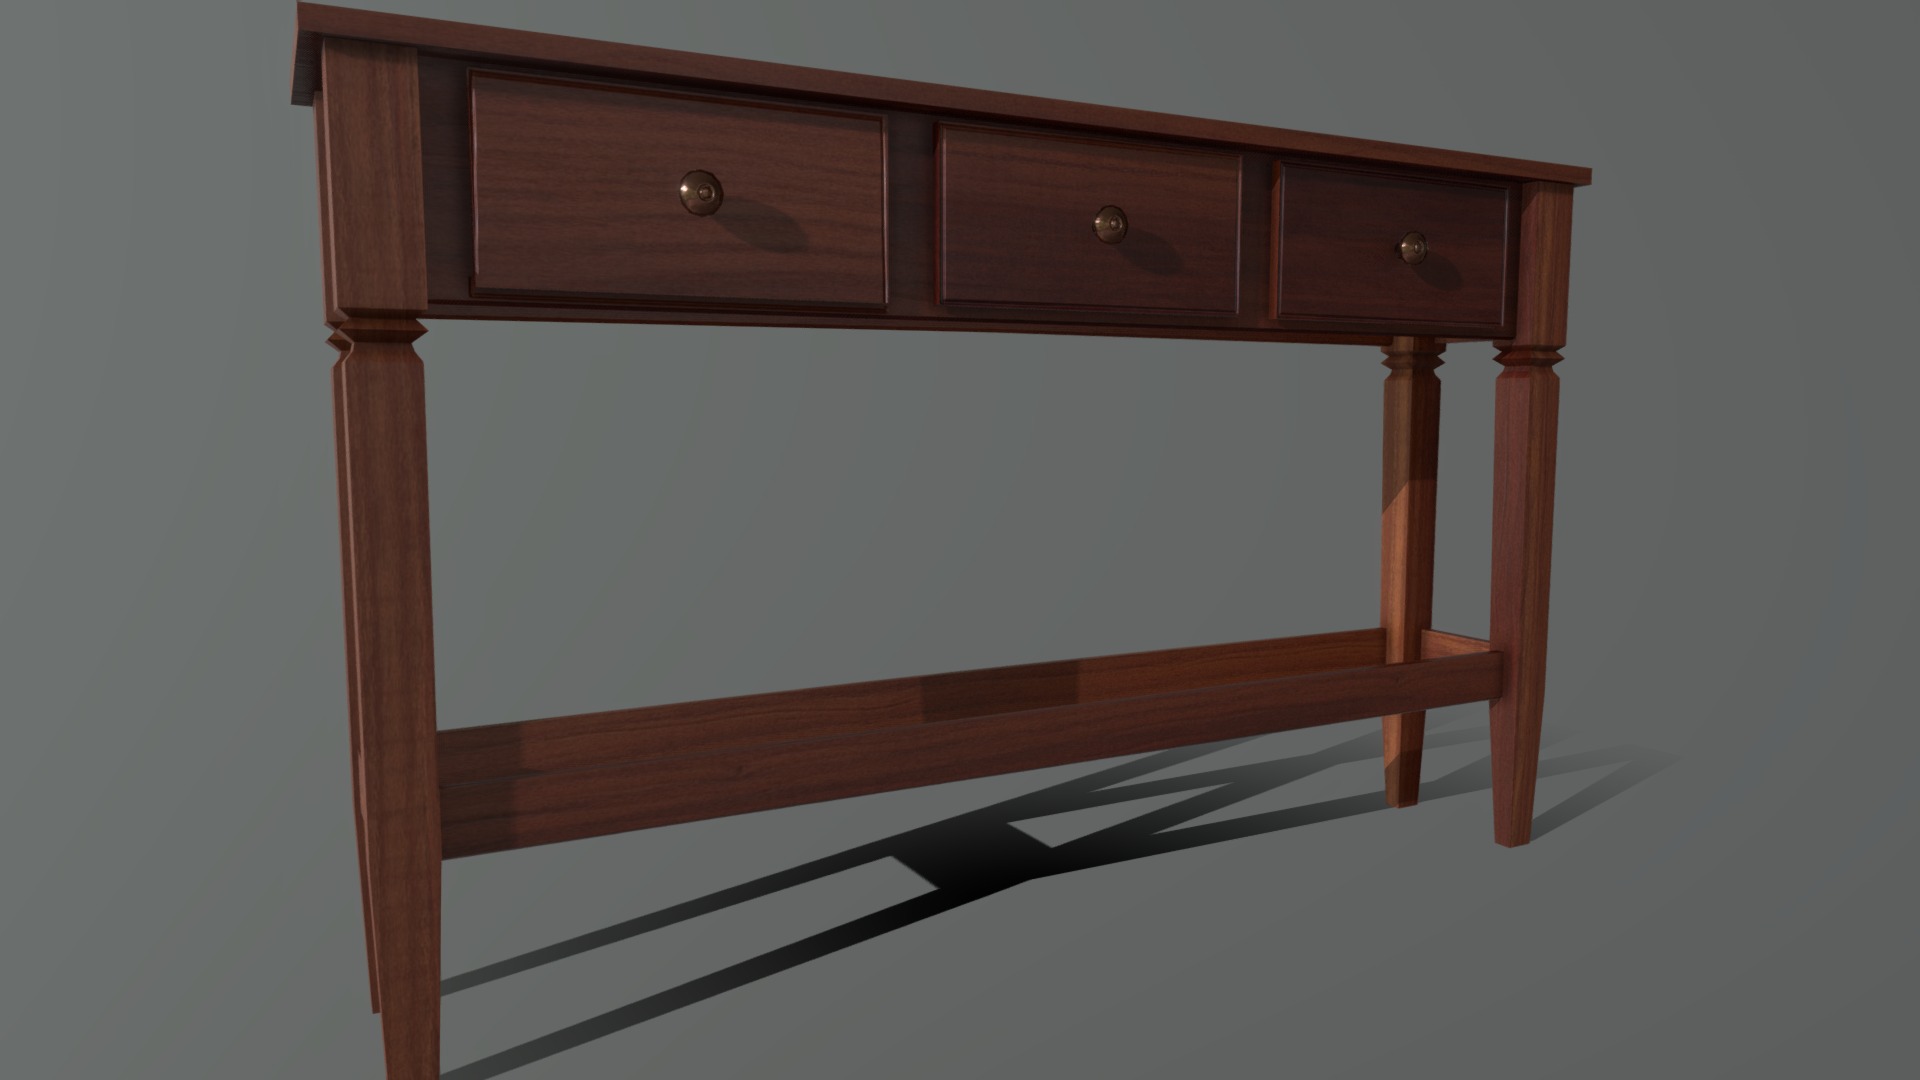 3D model Superfuntimes Simple Wall Table! - This is a 3D model of the Superfuntimes Simple Wall Table!. The 3D model is about a wooden desk with drawers.